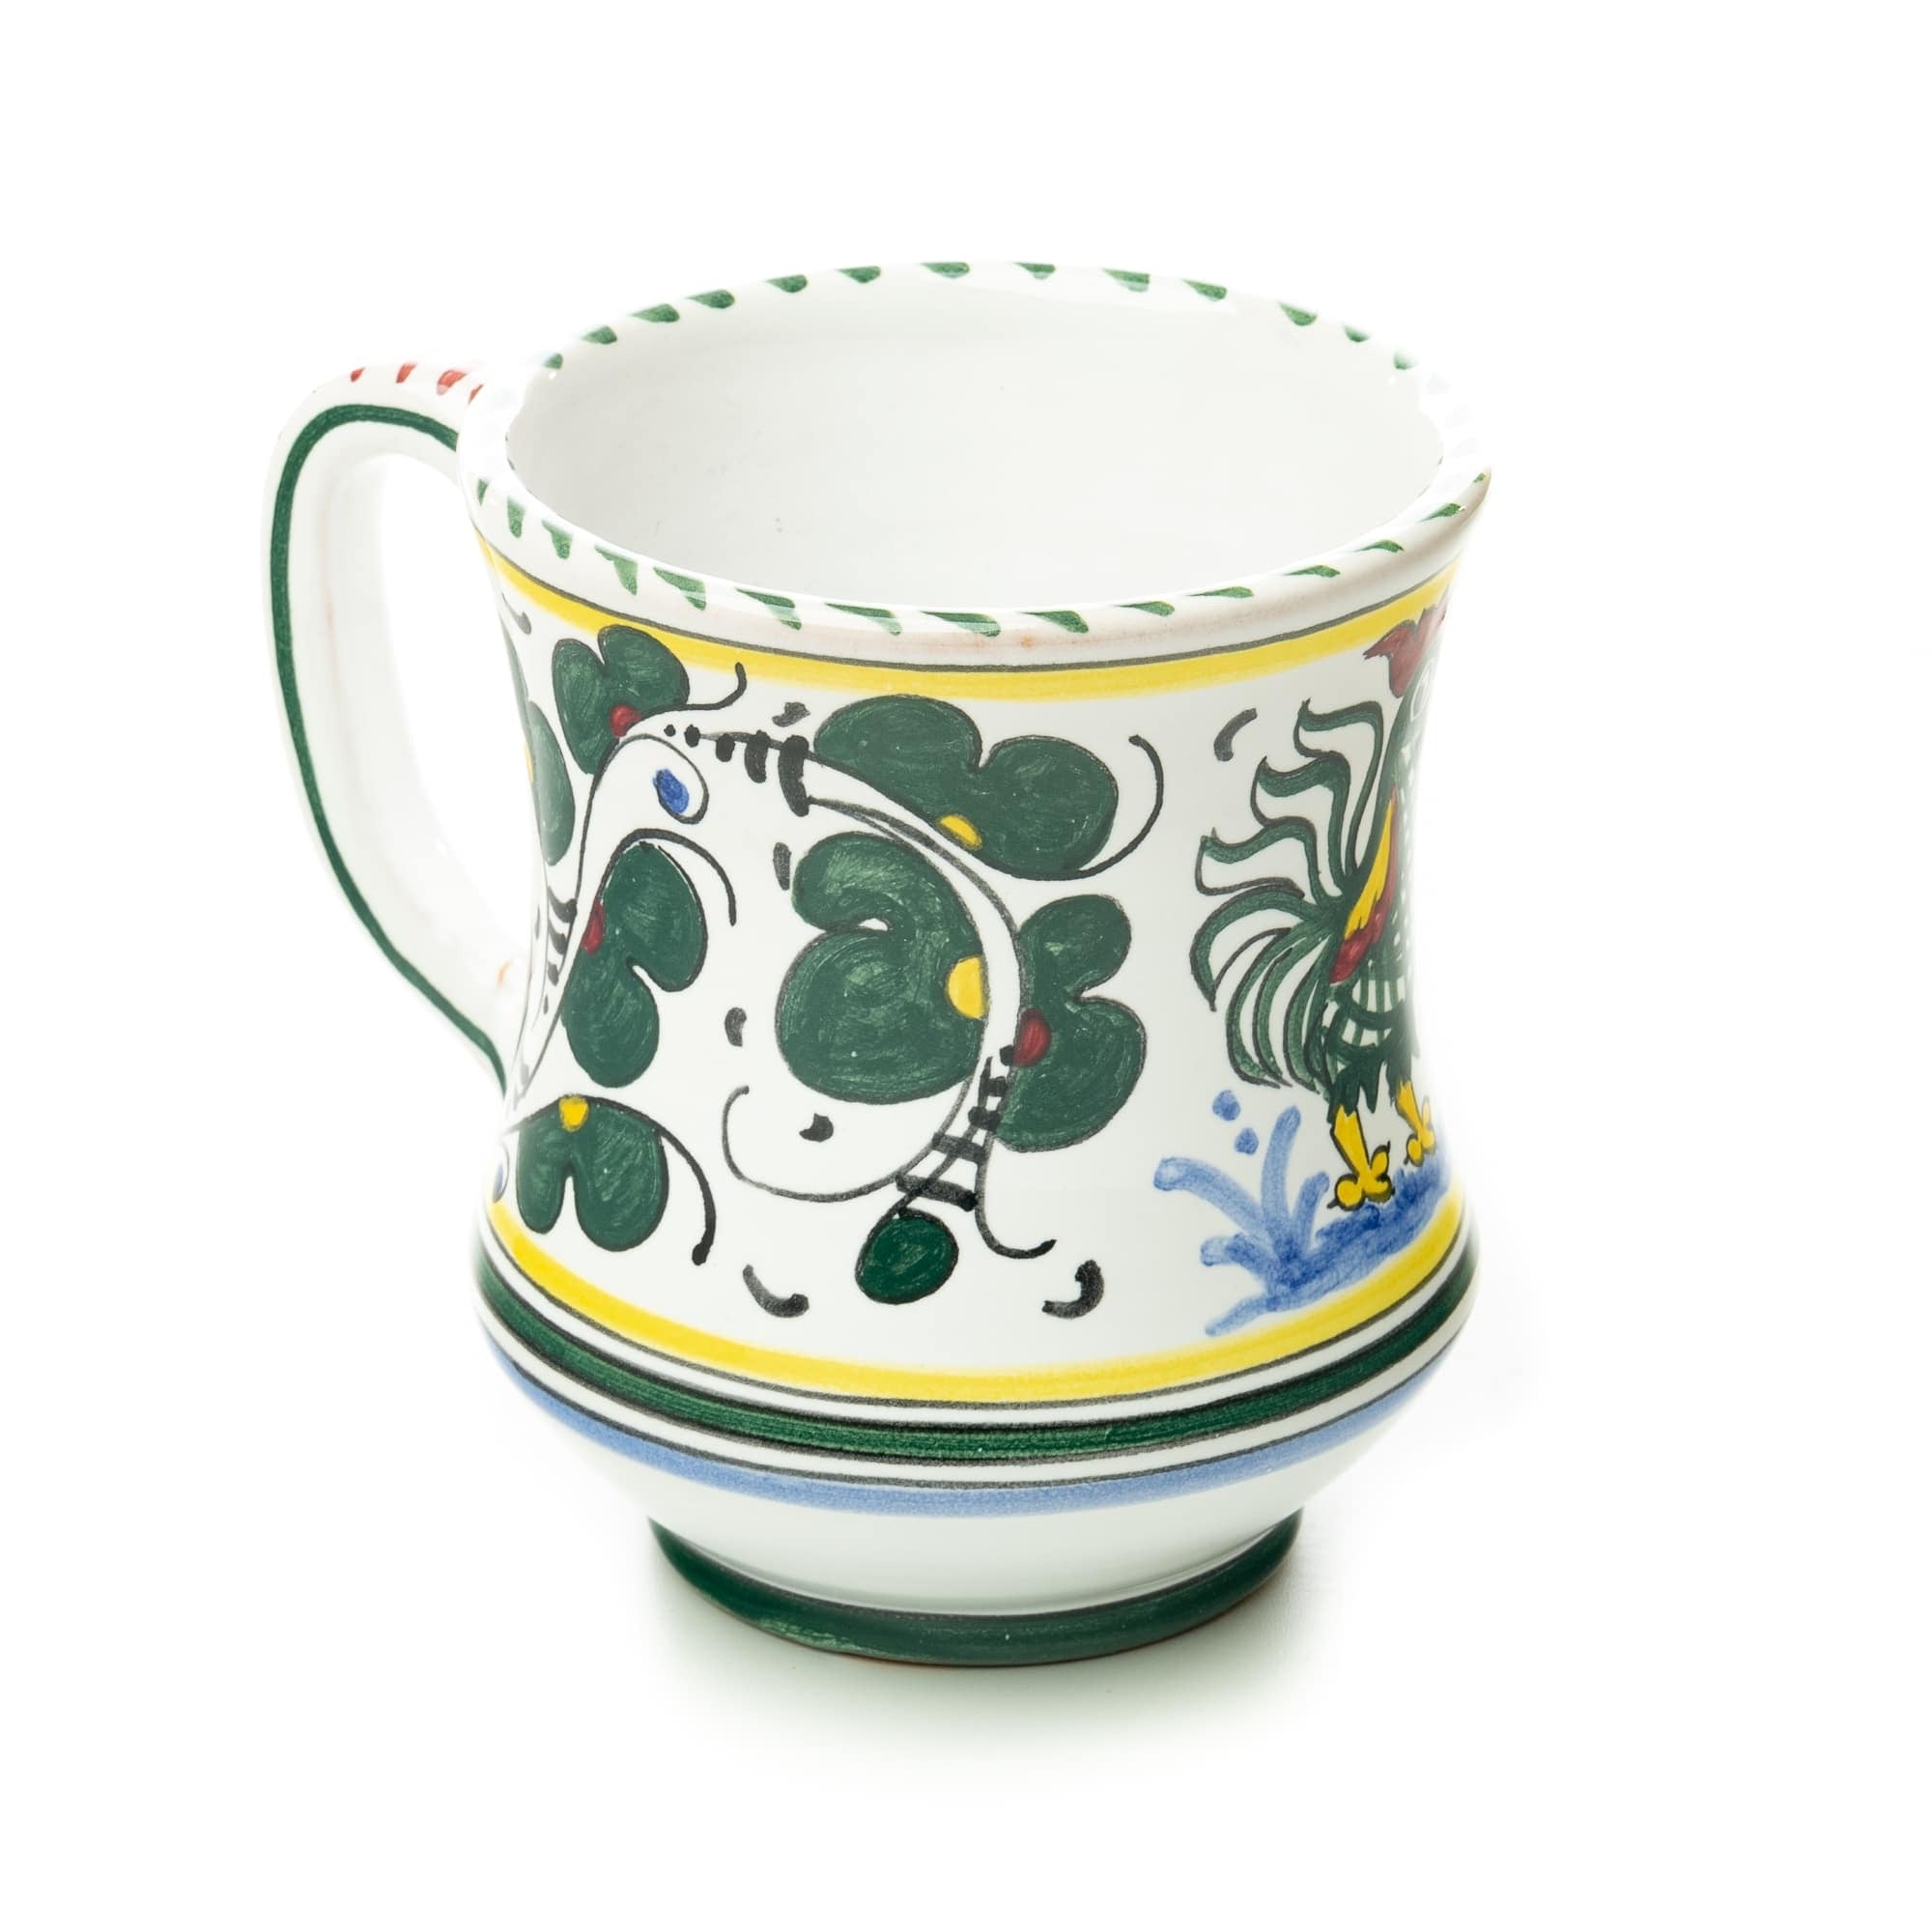 Orvieto Curved Mug, ceramics, pottery, italian design, majolica, handmade, handcrafted, handpainted, home decor, kitchen art, home goods, deruta, majolica, Artisan, treasures, traditional art, modern art, gift ideas, style, SF, shop small business, artists, shop online, landmark store, legacy, one of a kind, limited edition, gift guide, gift shop, retail shop, decorations, shopping, italy, home staging, home decorating, home interiors